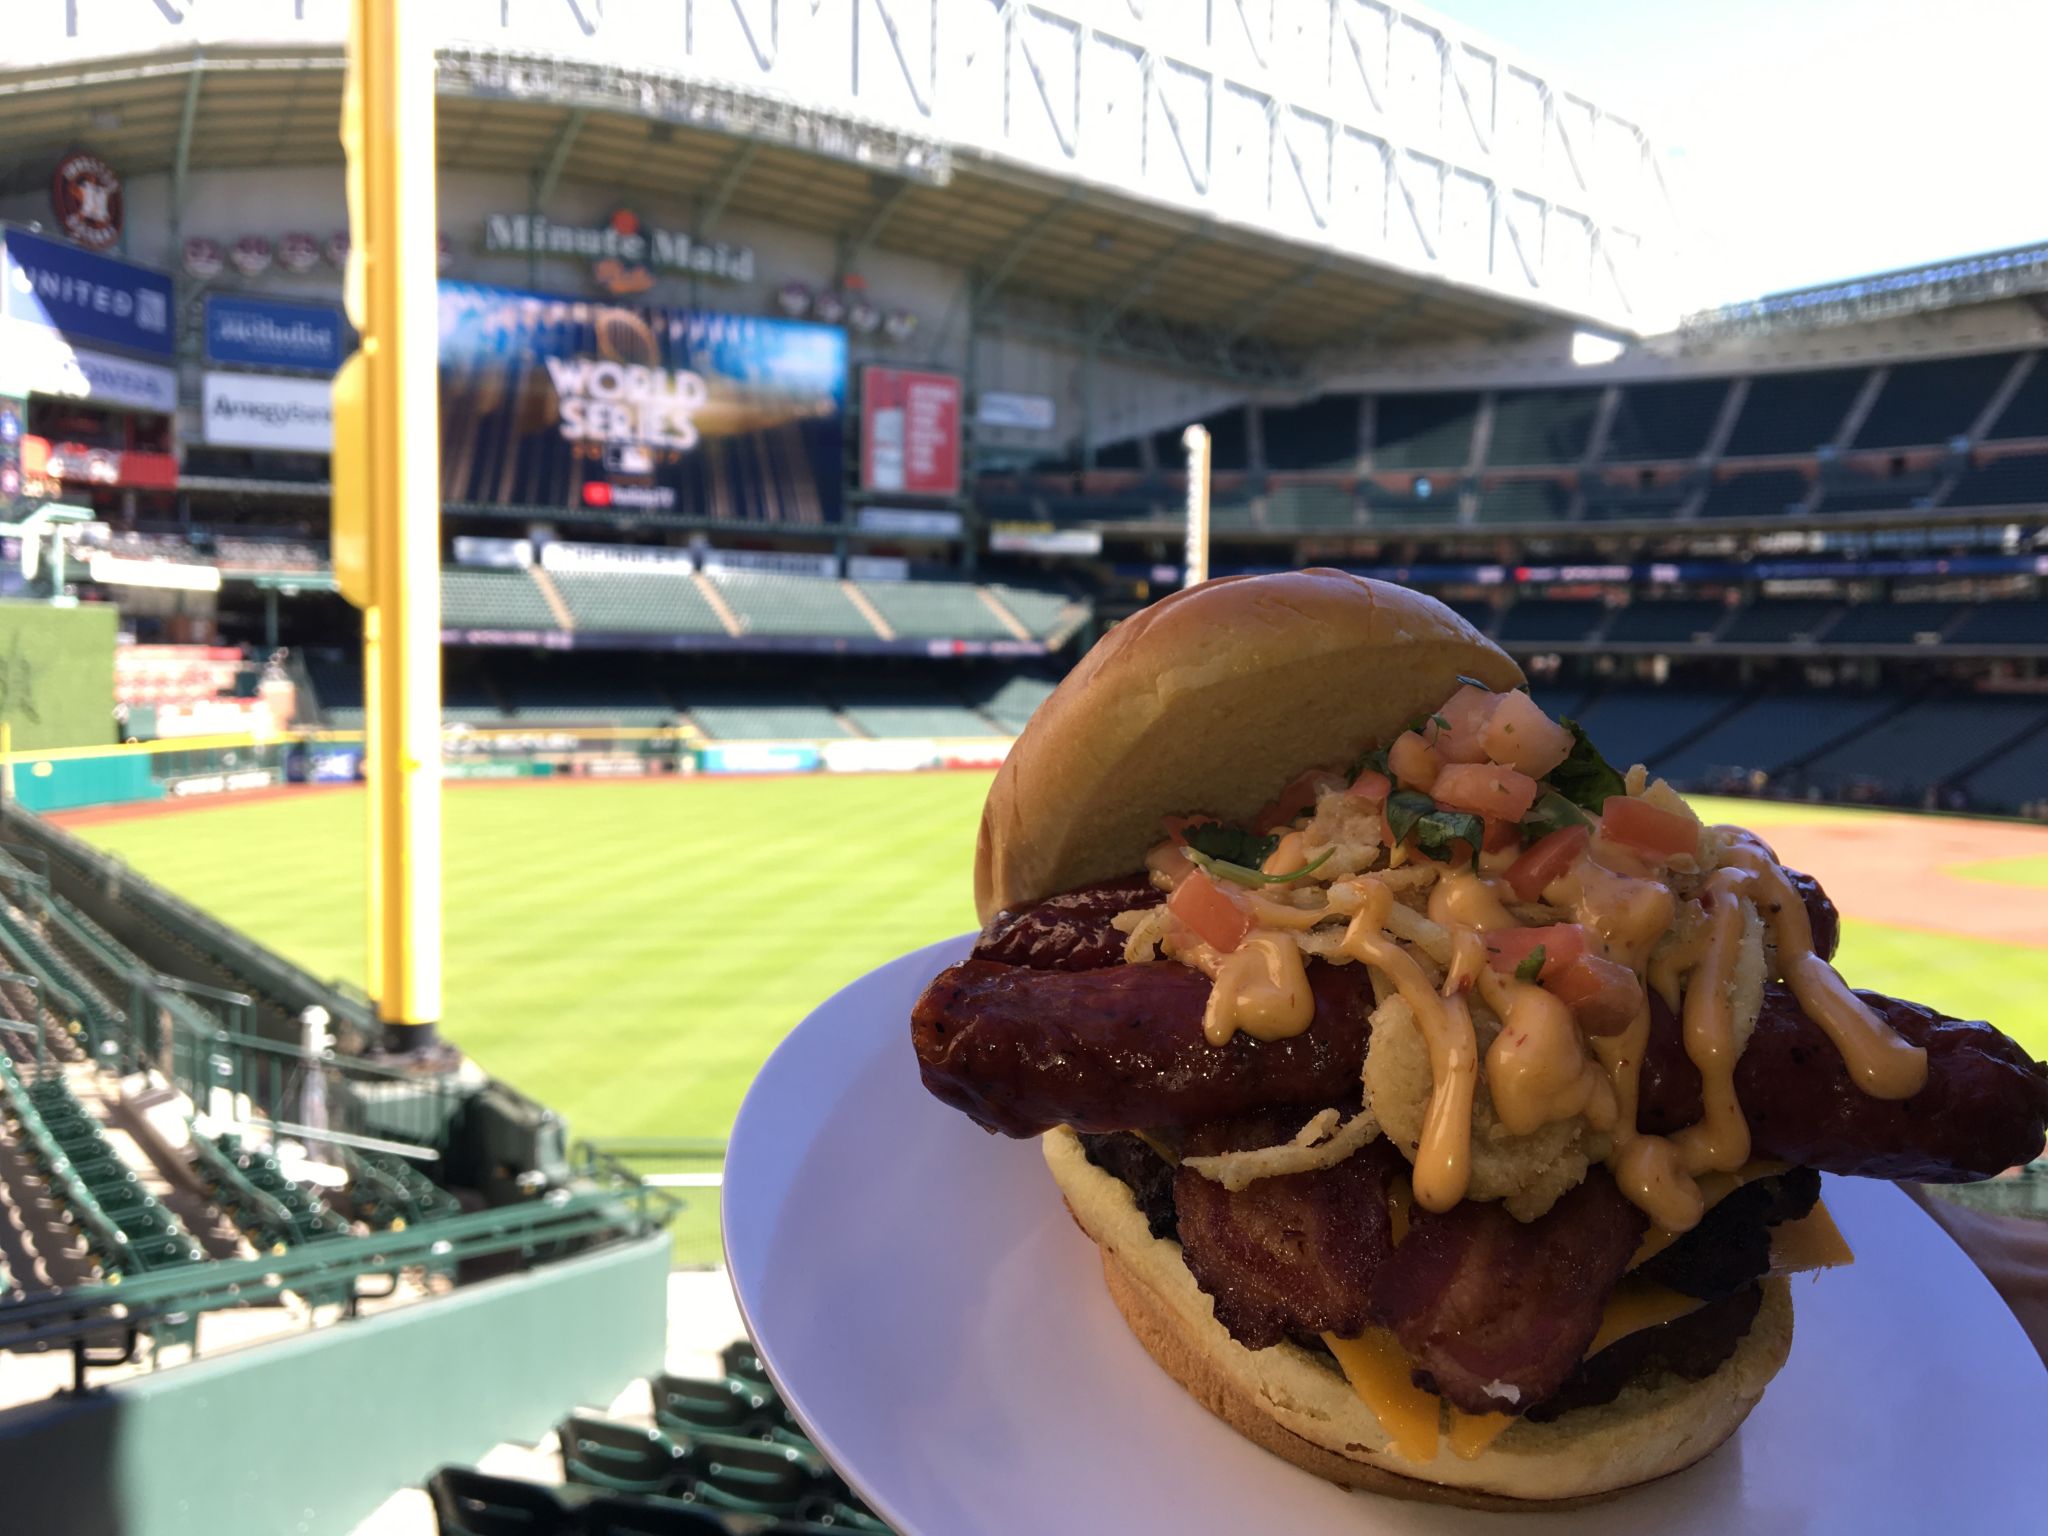 Minute Maid Park prepares fans for amazing, new World Series dishes